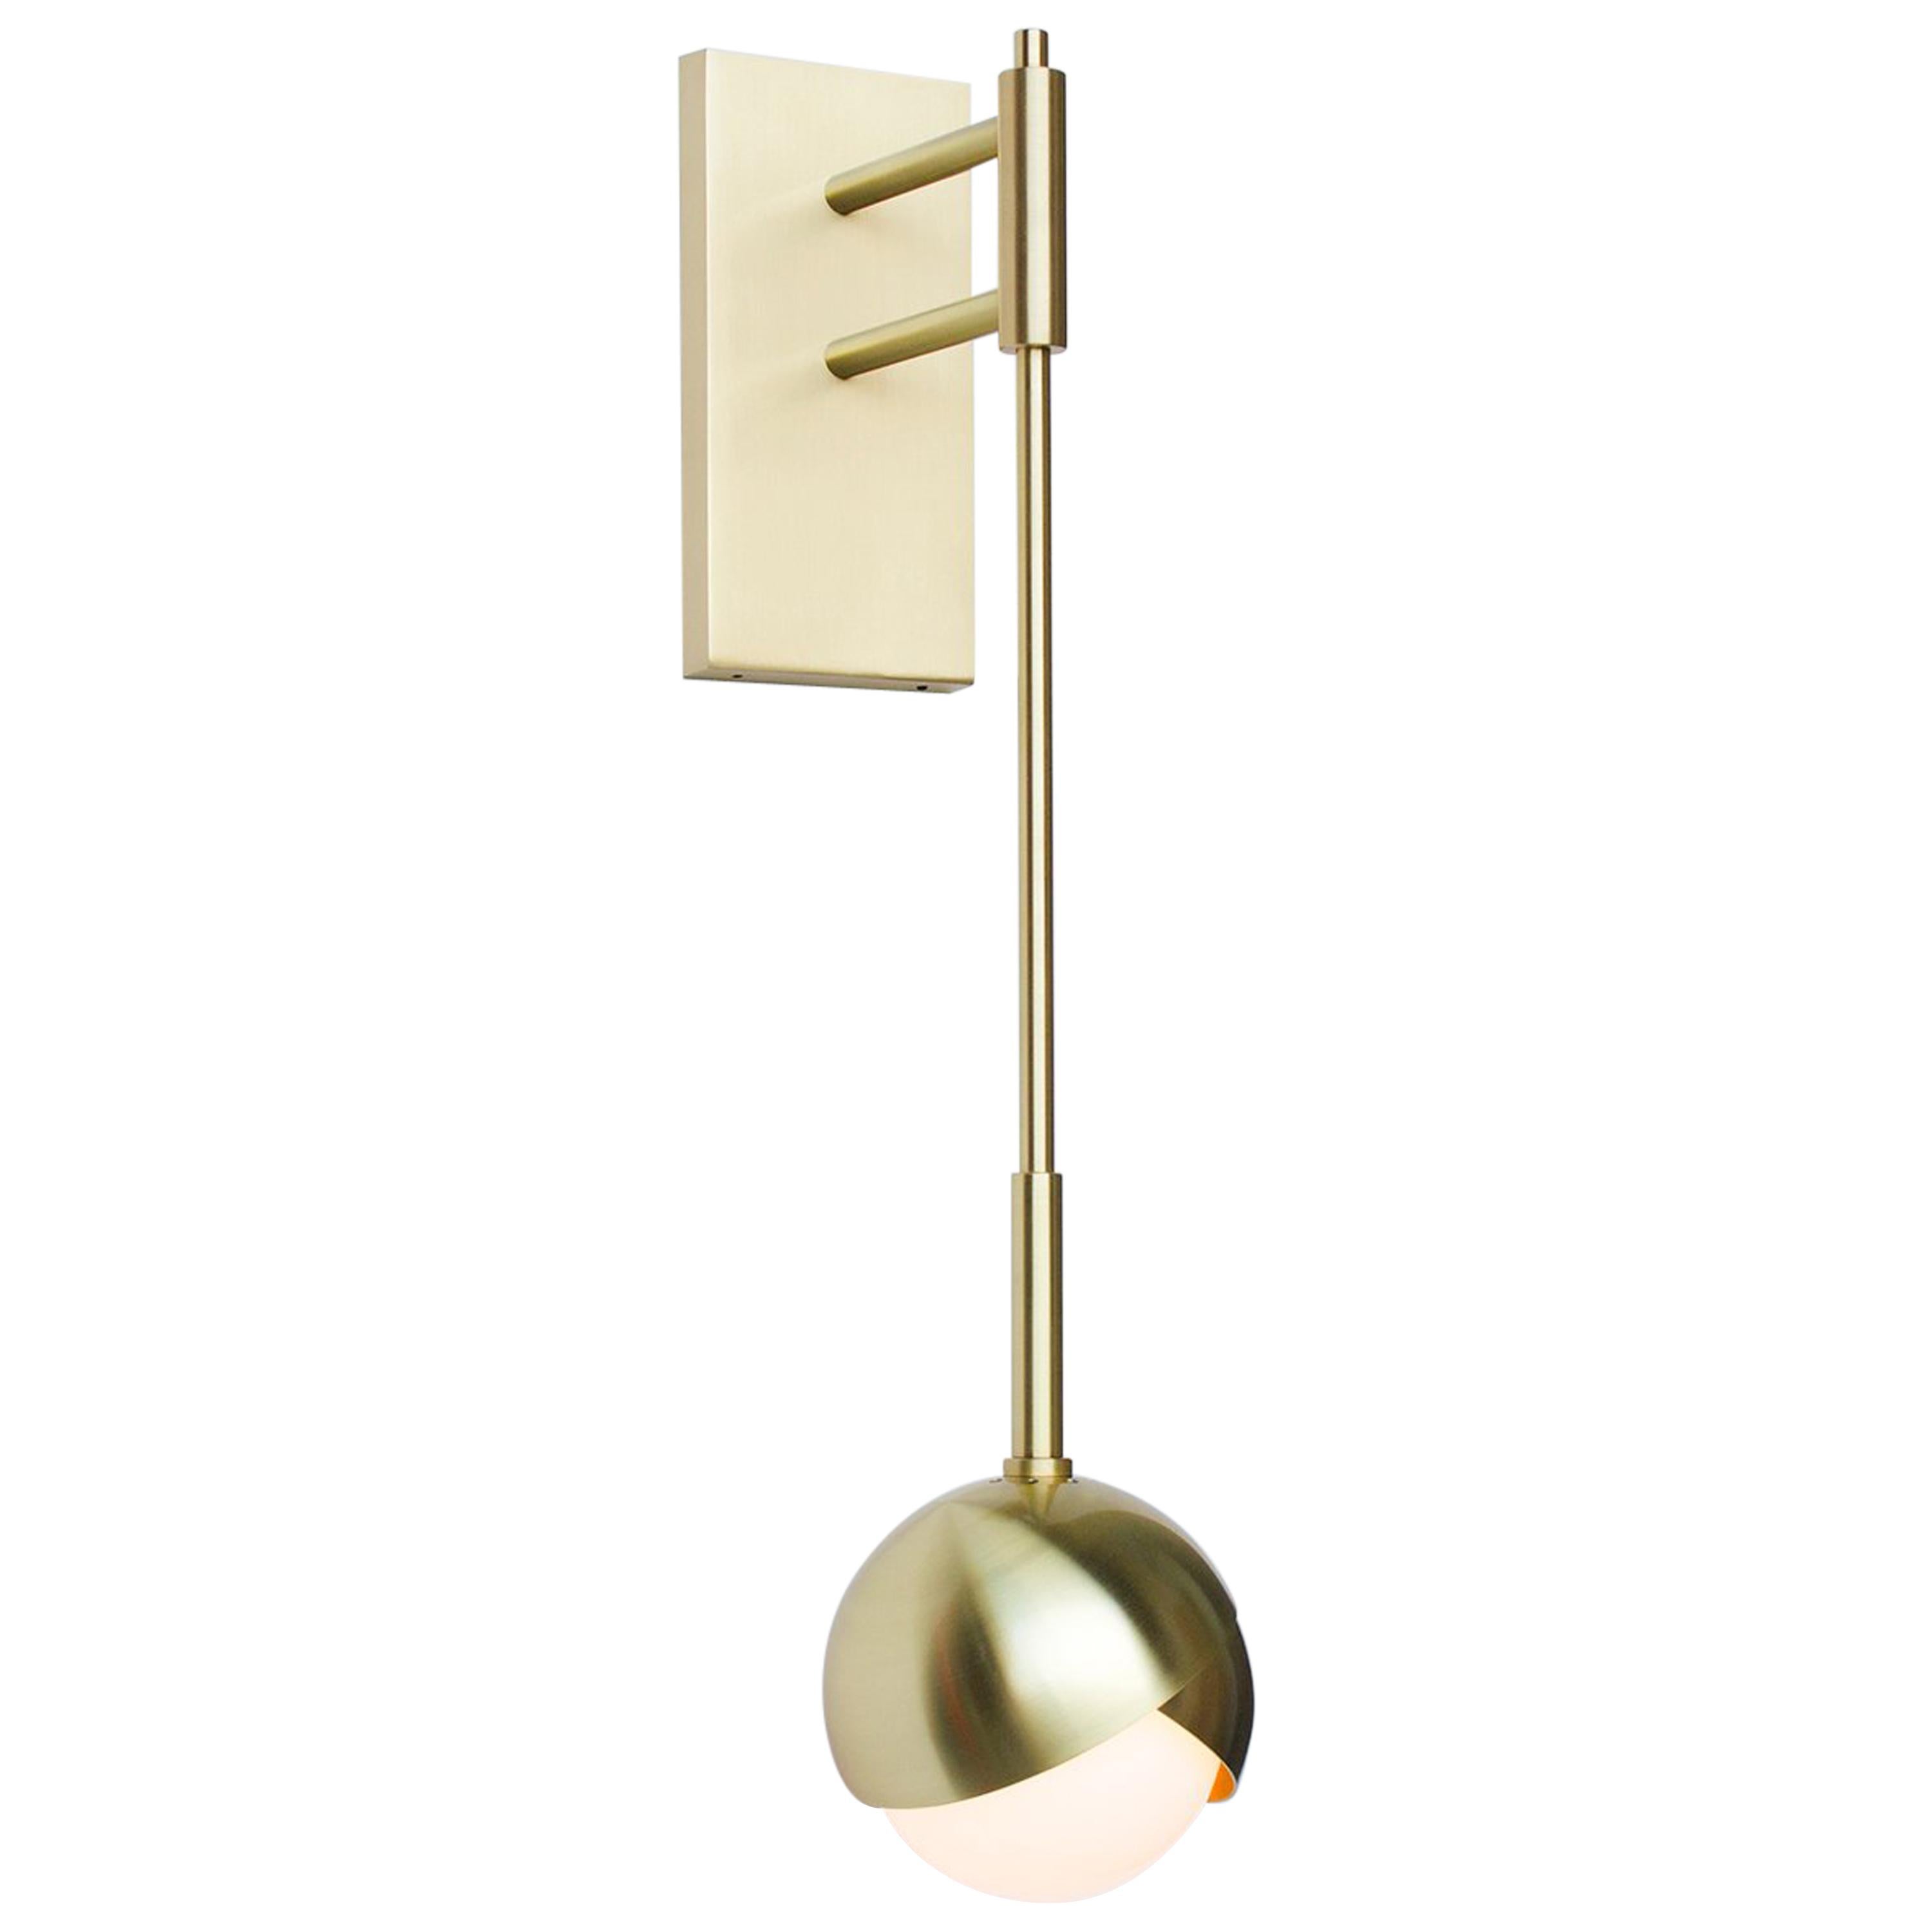 Benedict Truss Sconce in a Satin Brass Finish with White Opal Glass